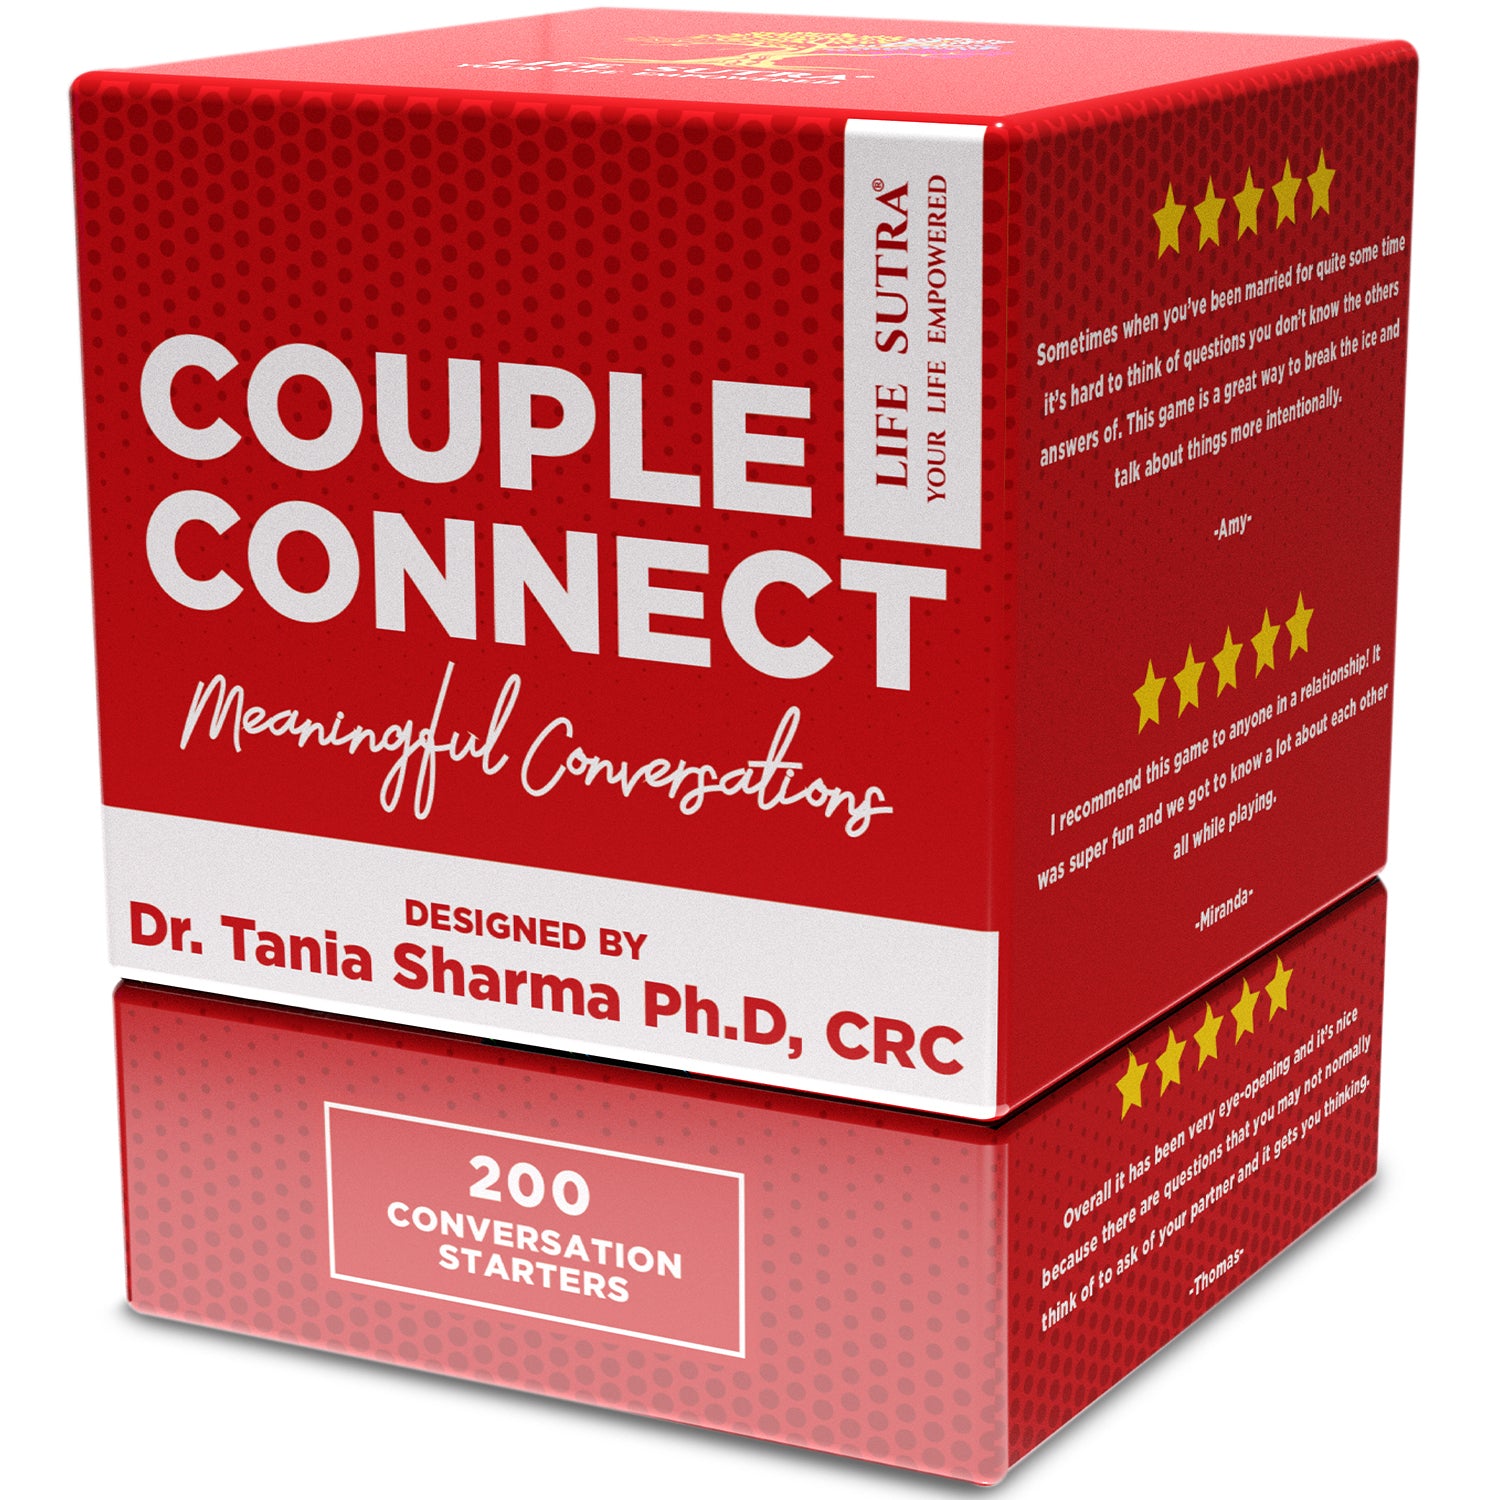 Couple Connect - 200 Conversation Starters and Activities - Improve Communication, Romance and Trust